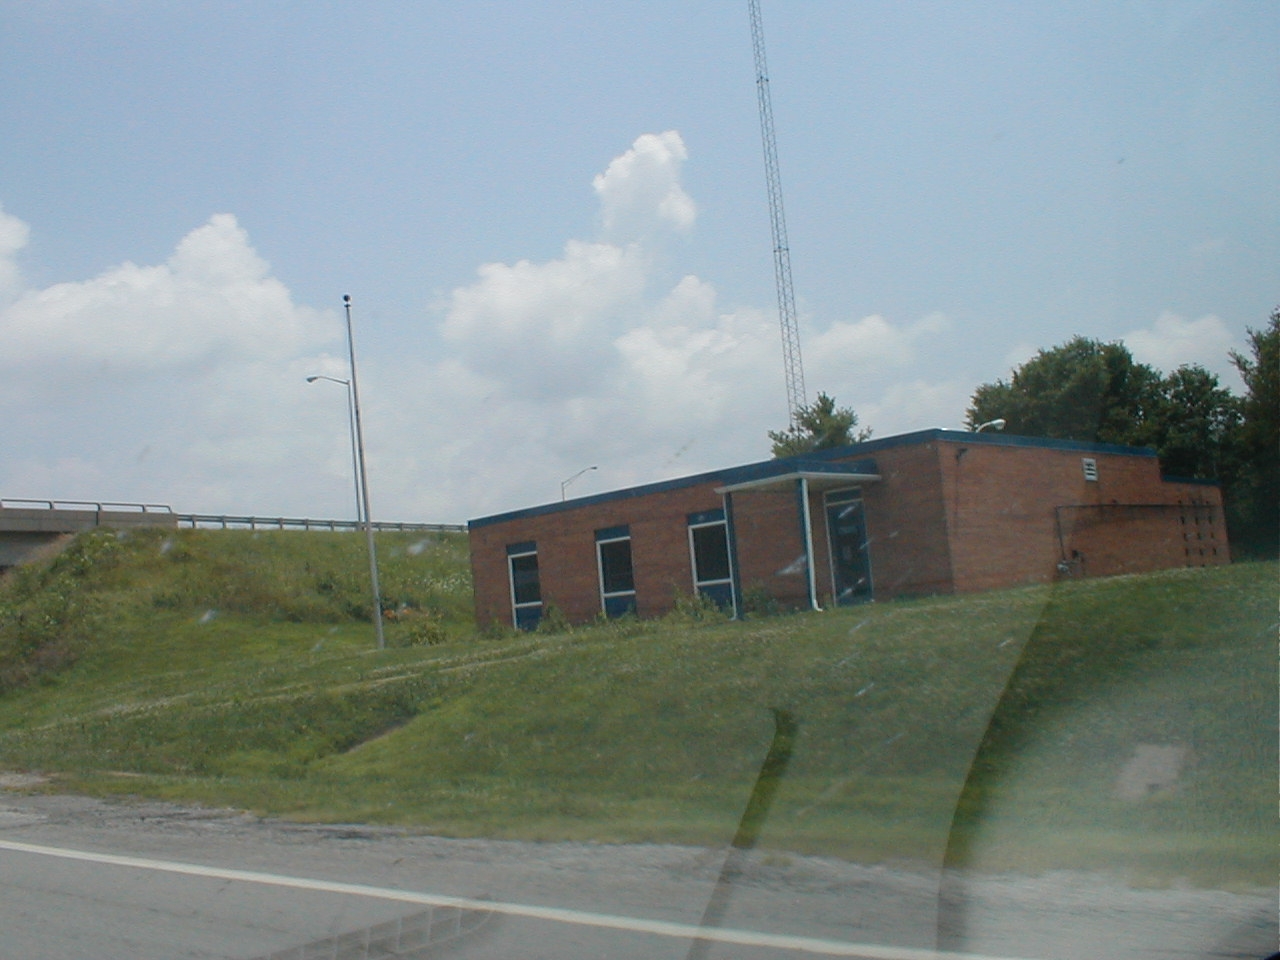 Toll office building at Exit 27.